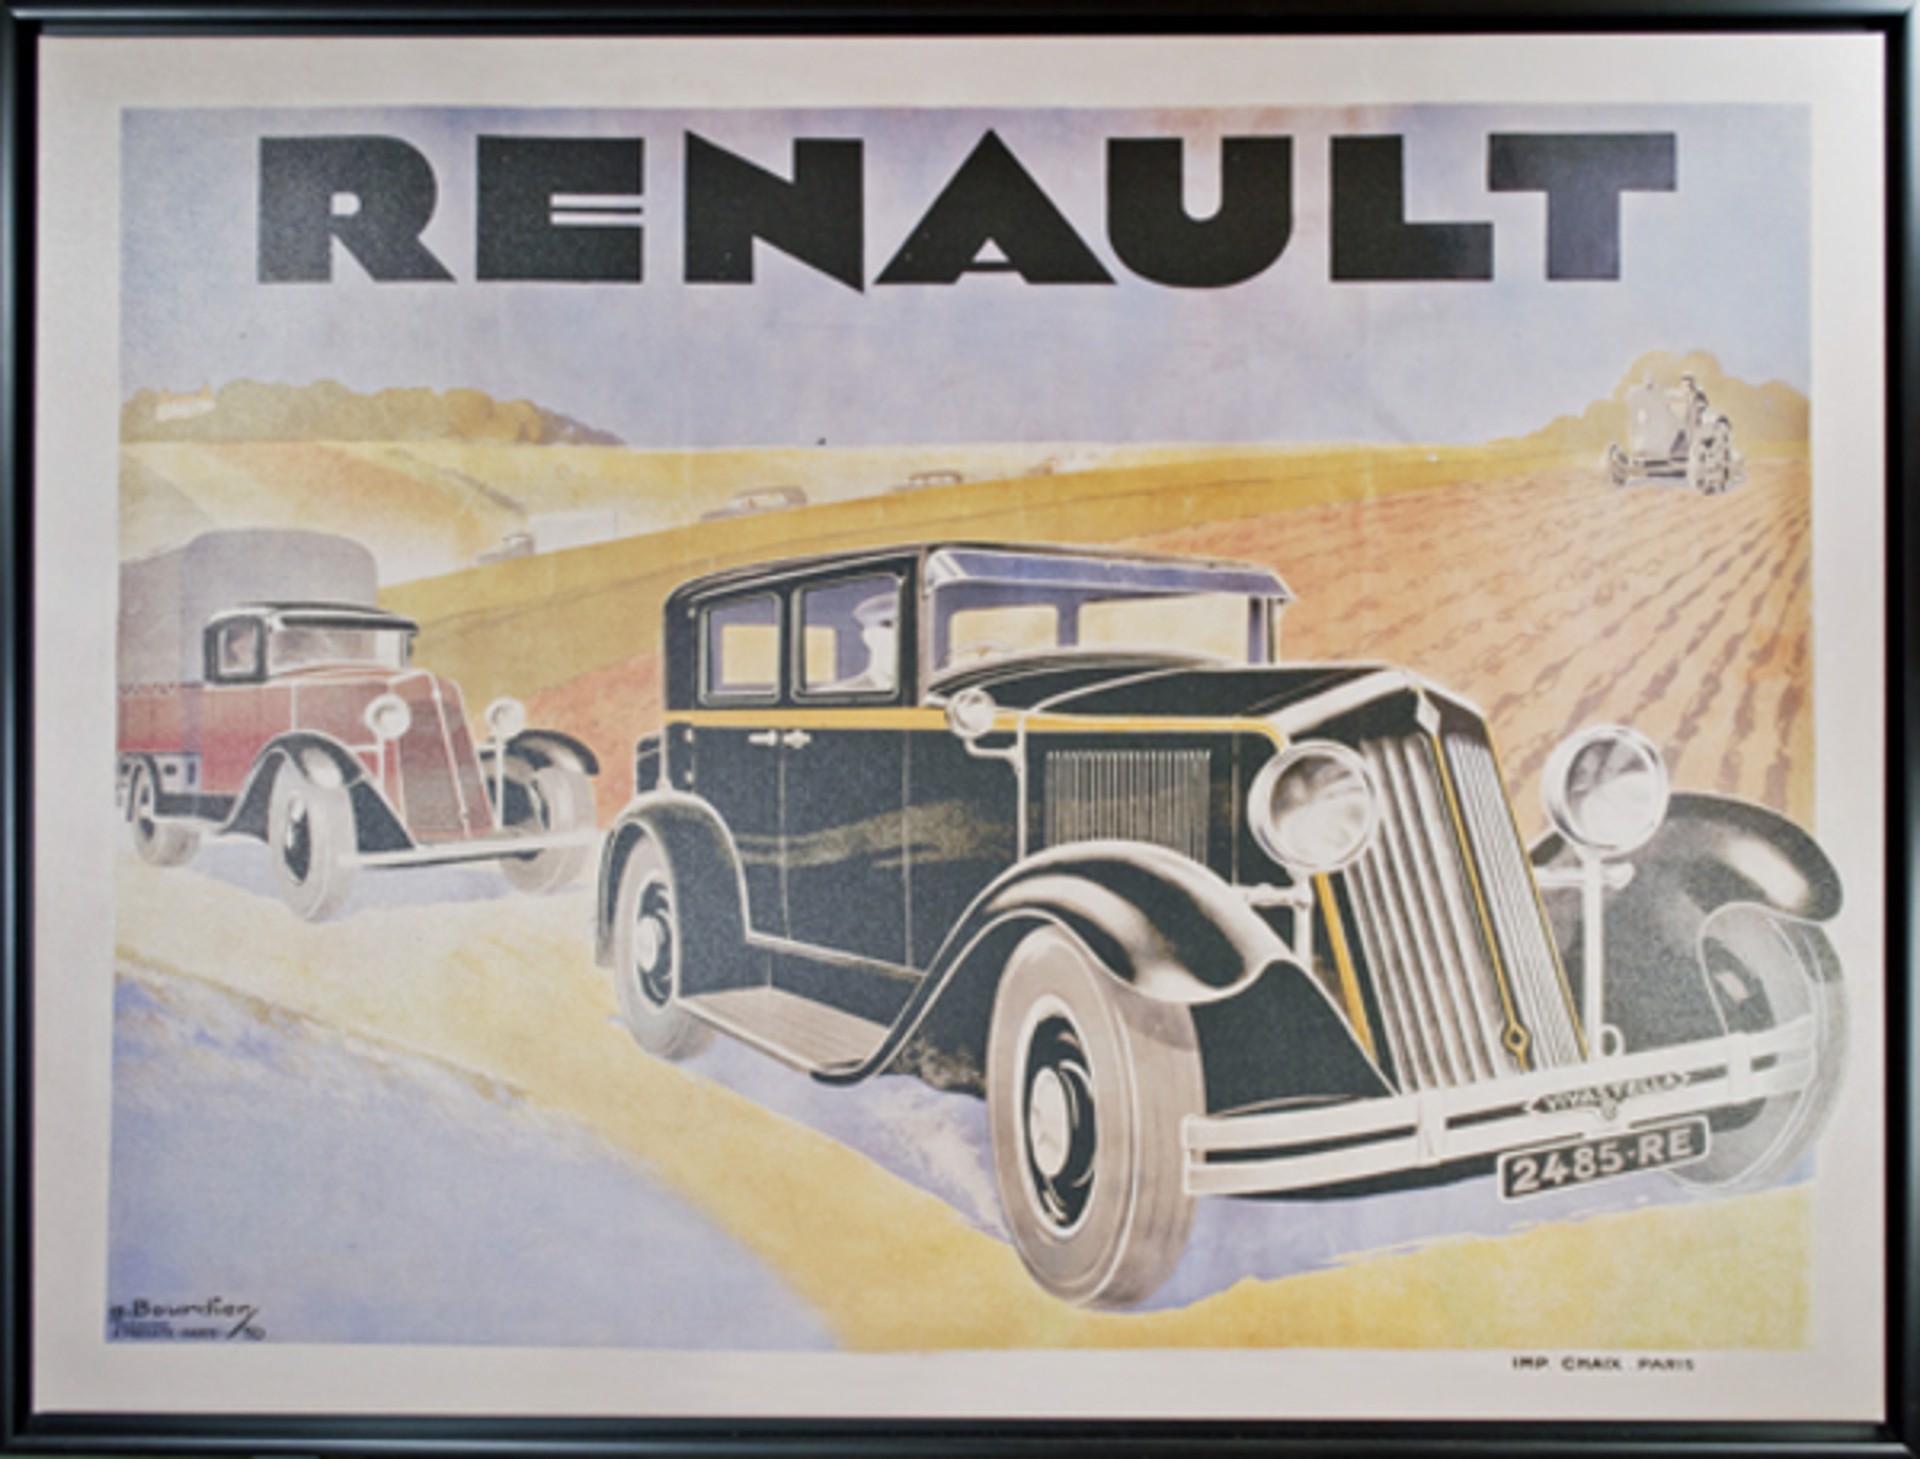 Renault by G. Bourdier